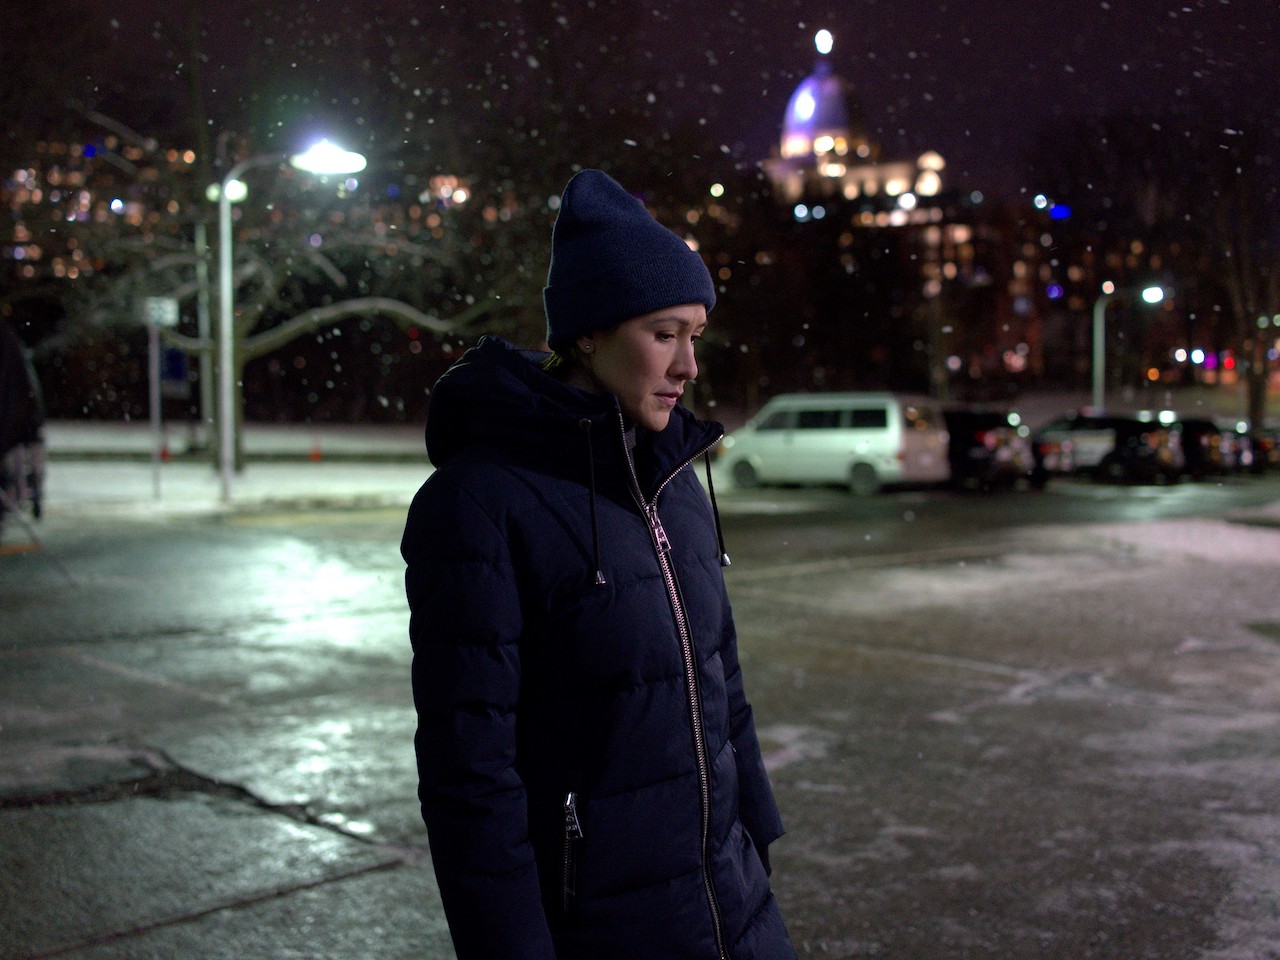 A woman in a dark jacket and toque walking across the street.